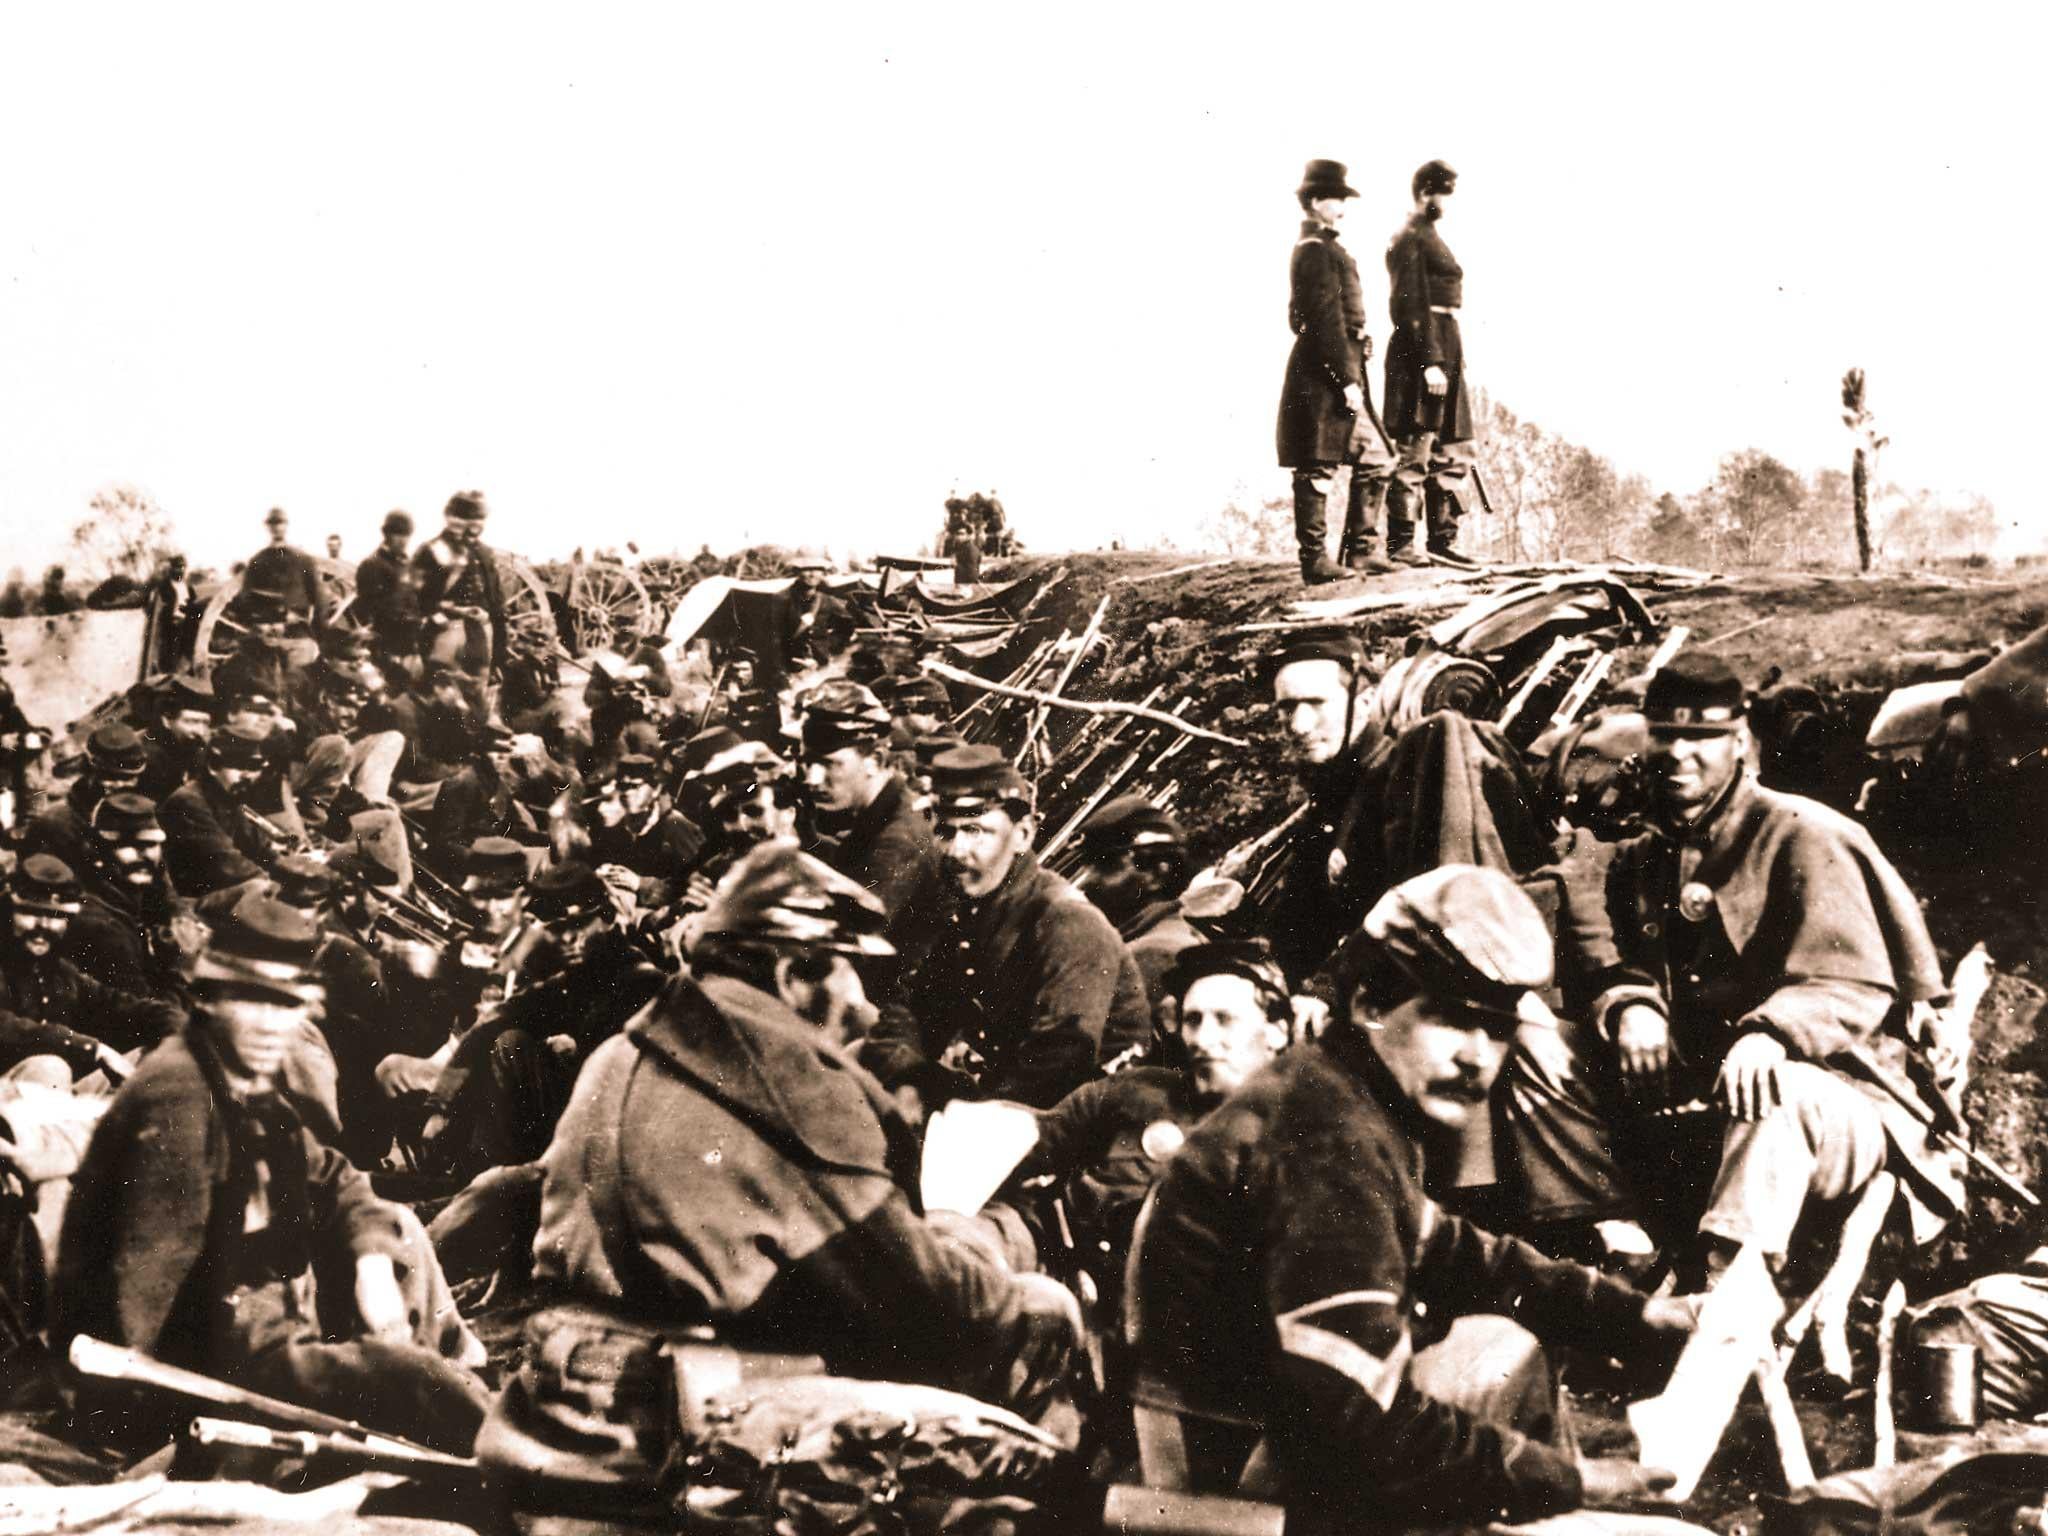 Soldiers during the American Civil War, in the Confederate Army